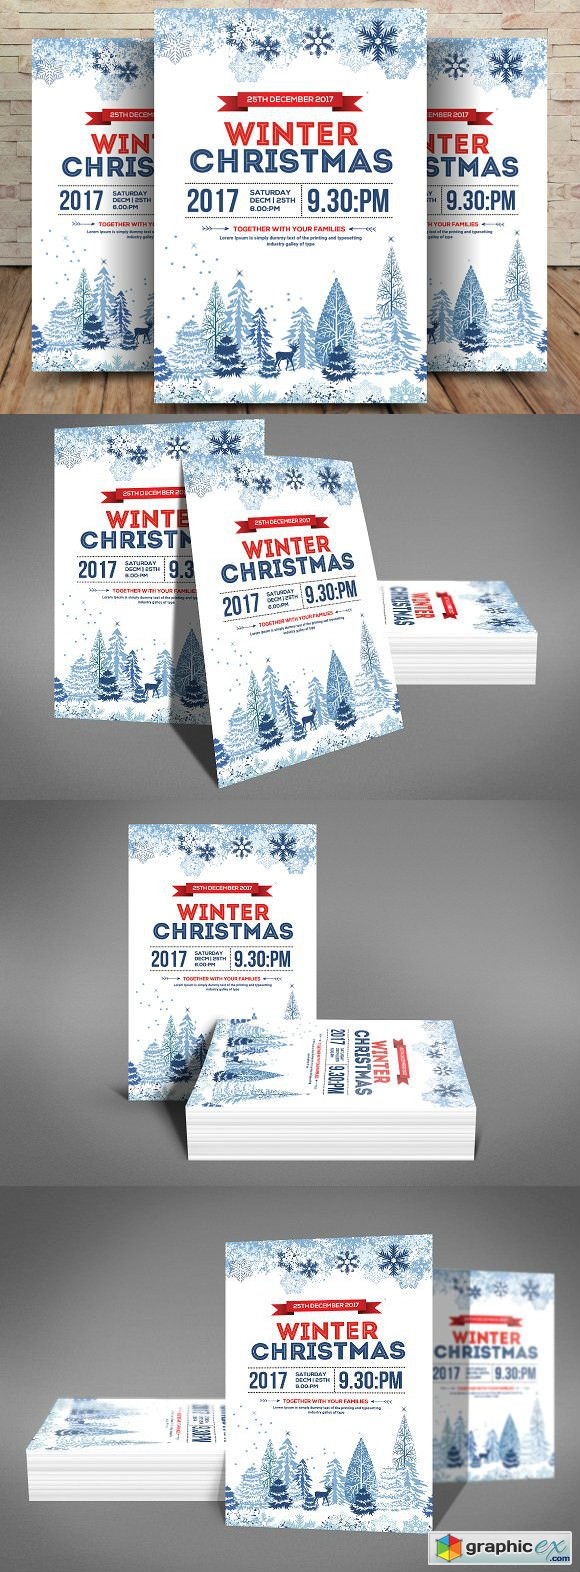 Winter Sounds-Christmas Party Flyer